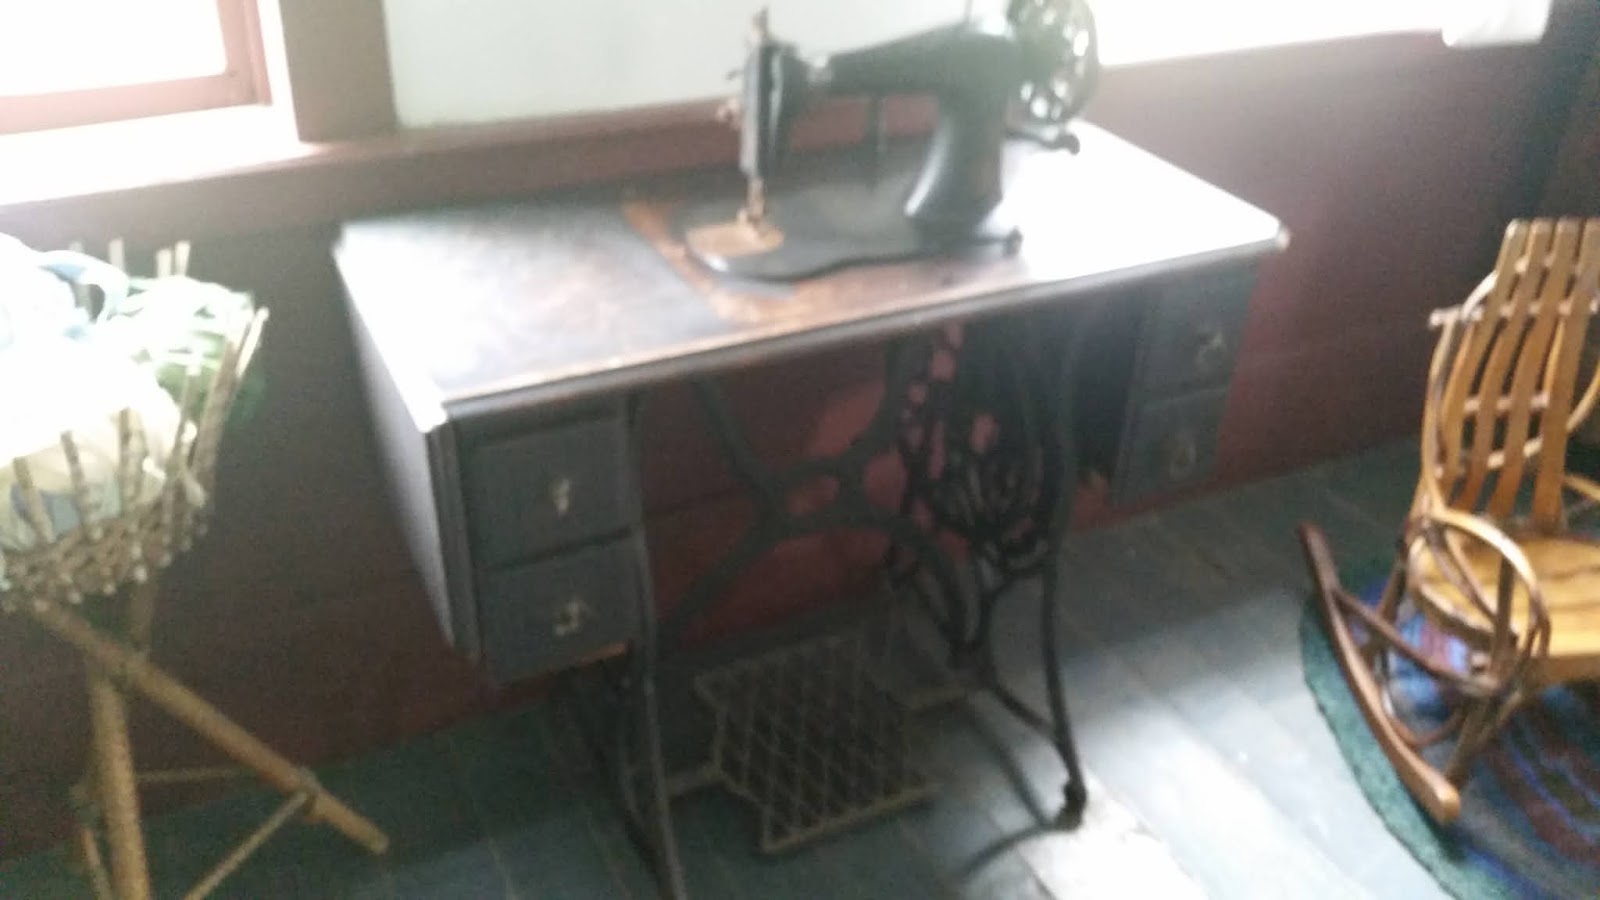 History of Treadle Sewing Machines